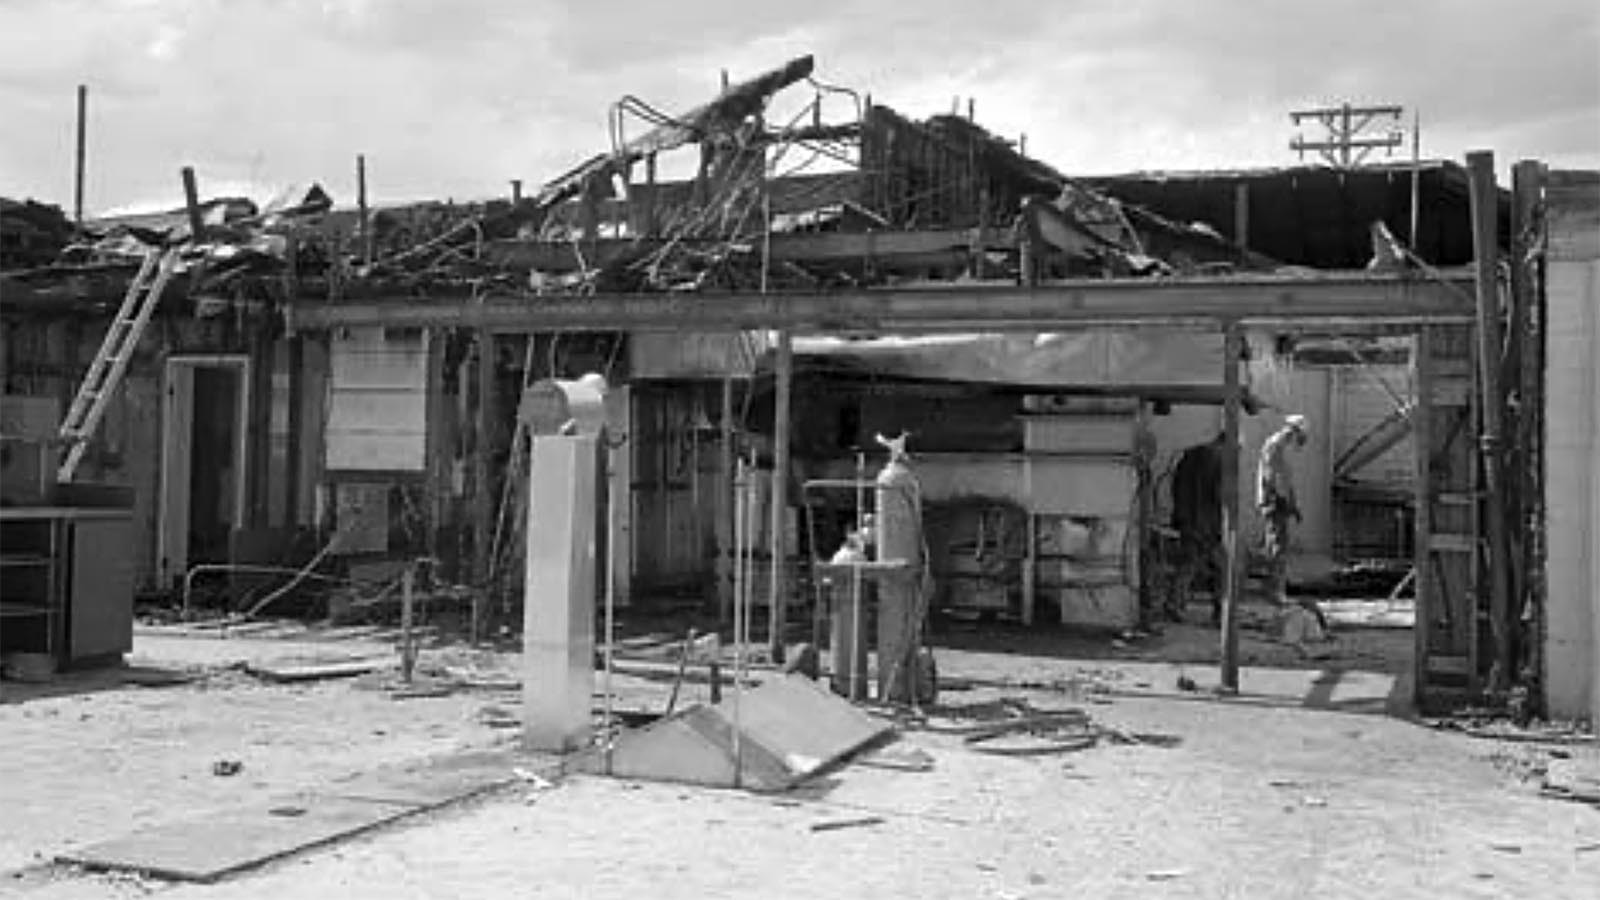 Fire devastated the Hitching Post Inn more than once over its storied history.